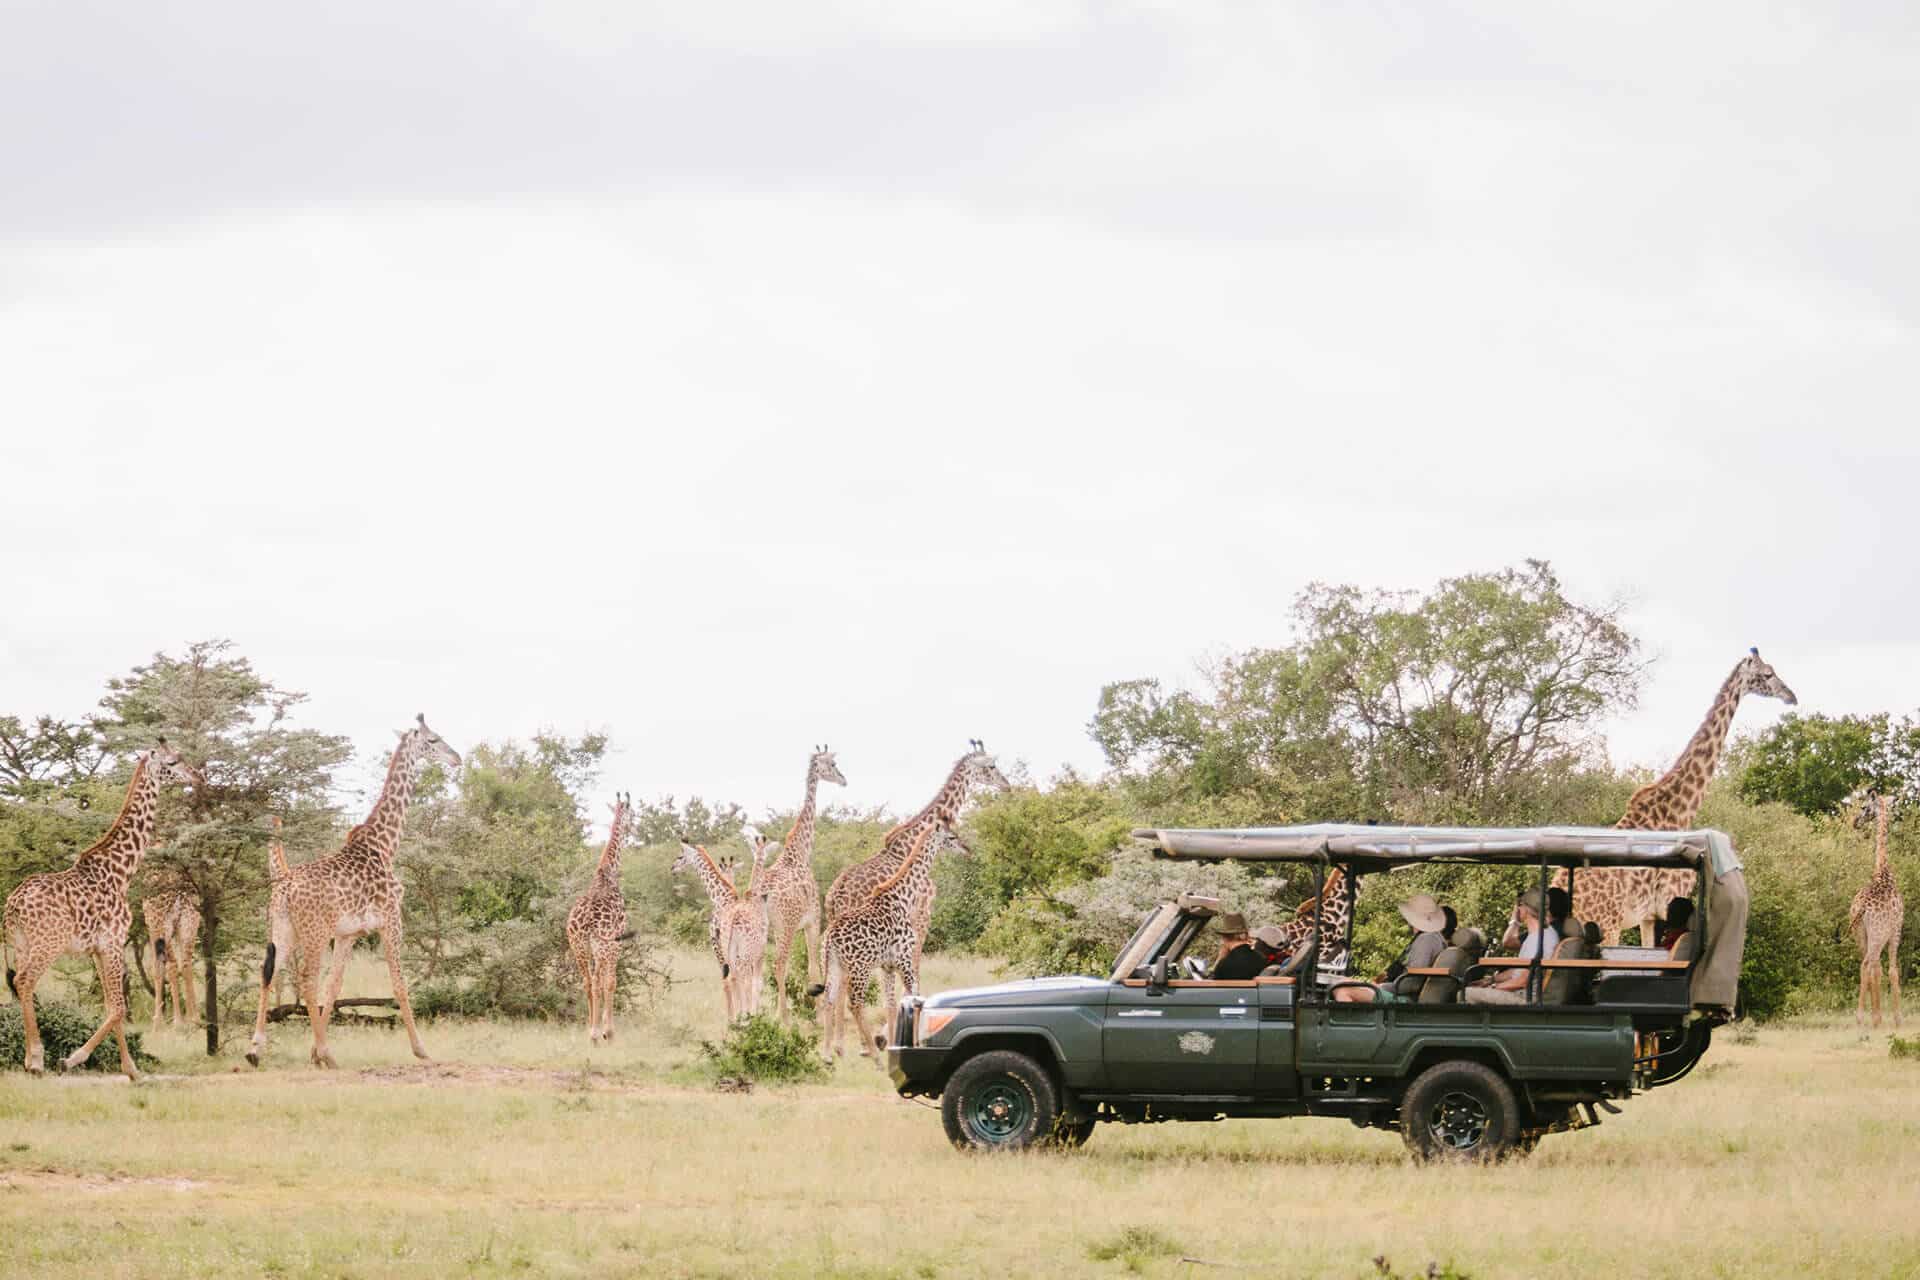 Imagine ticking off seeing the Big 5 animals during your Christmas in East Africa safari